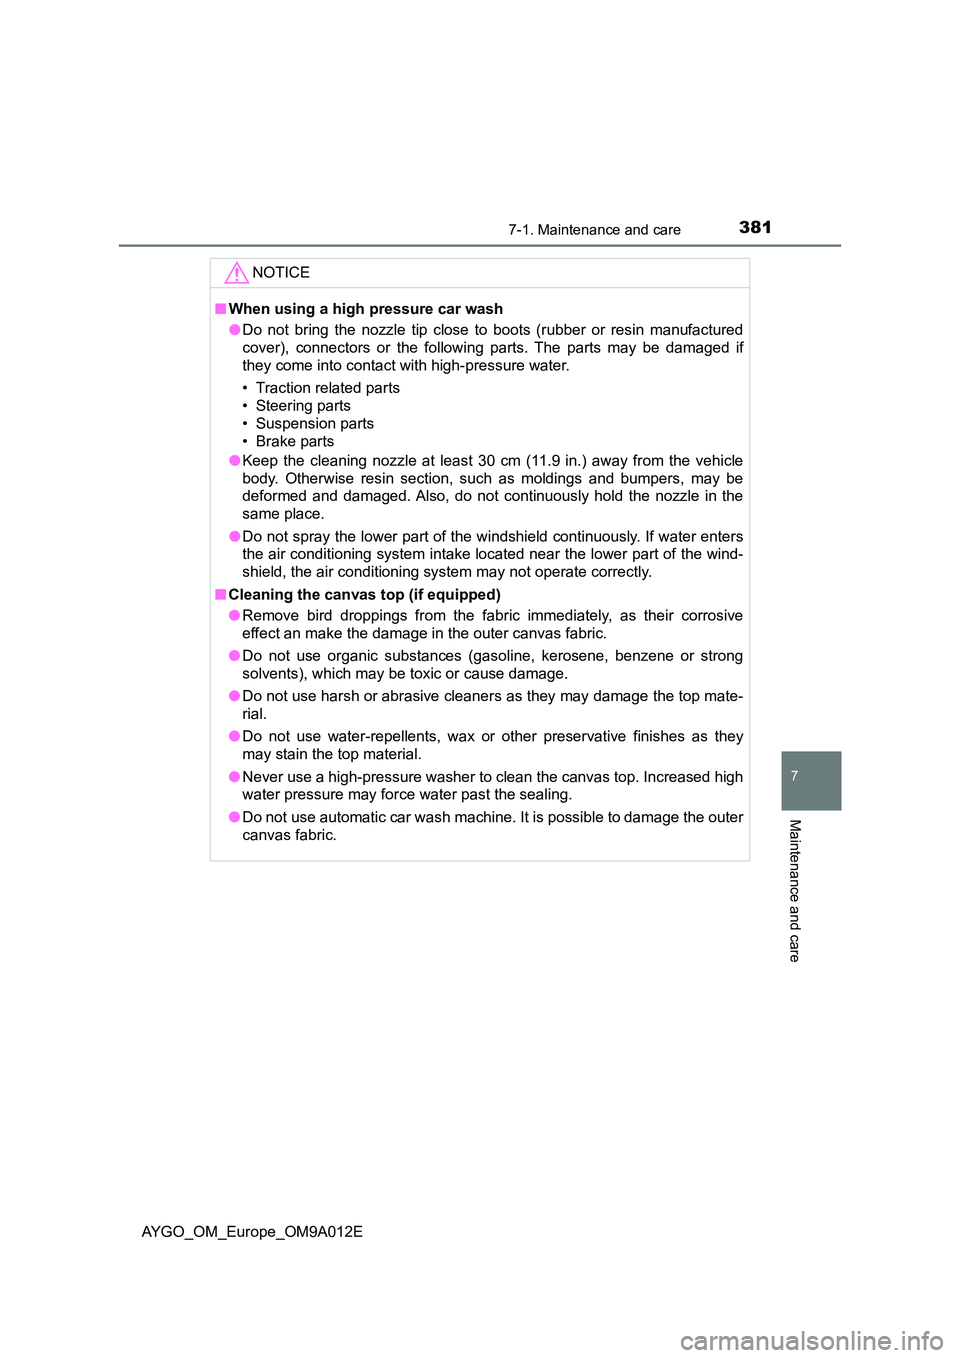 TOYOTA AYGO 2021  Owners Manual 3817-1. Maintenance and care
7
Maintenance and care
AYGO_OM_Europe_OM9A012E
NOTICE
■When using a high pressure car wash 
● Do not bring the nozzle tip close to boots (rubber or resin manufactured 